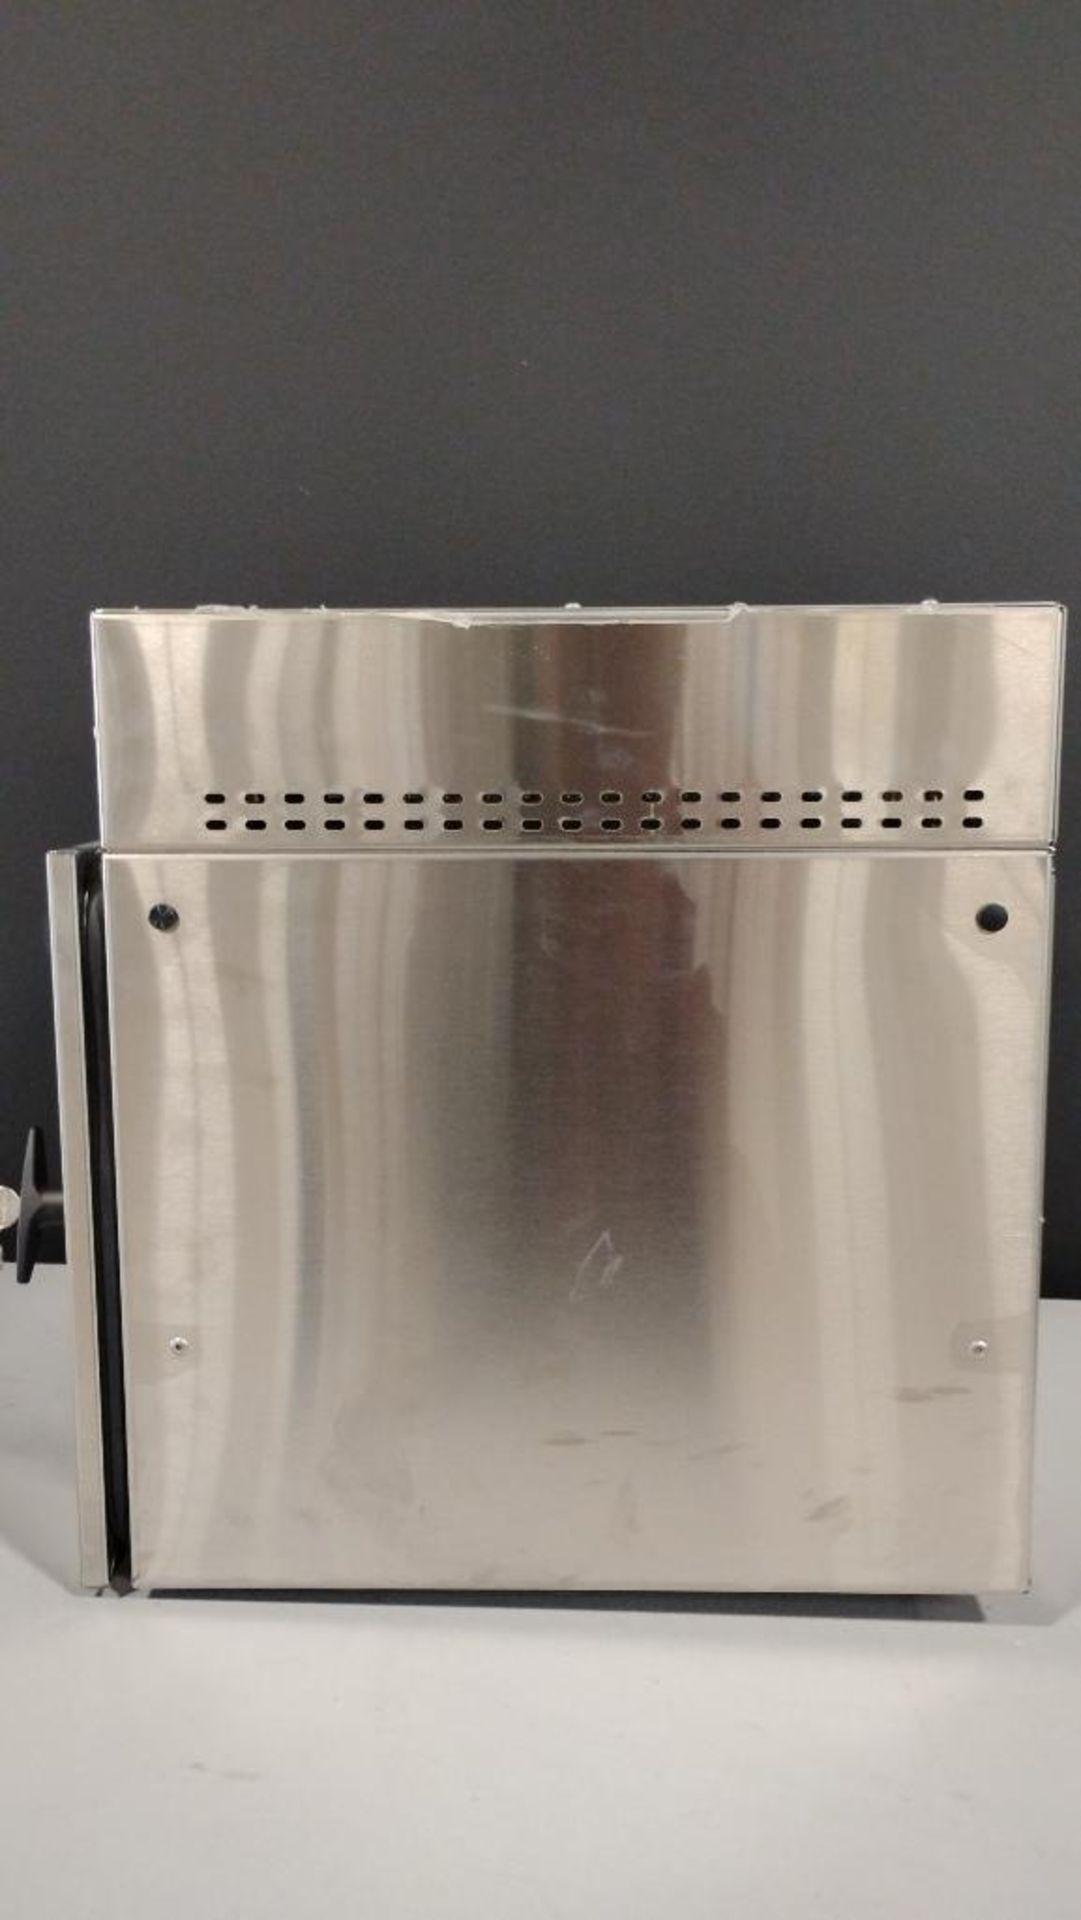 AIR SCIENCE UV-BOX WARMING CABINET - Image 2 of 5